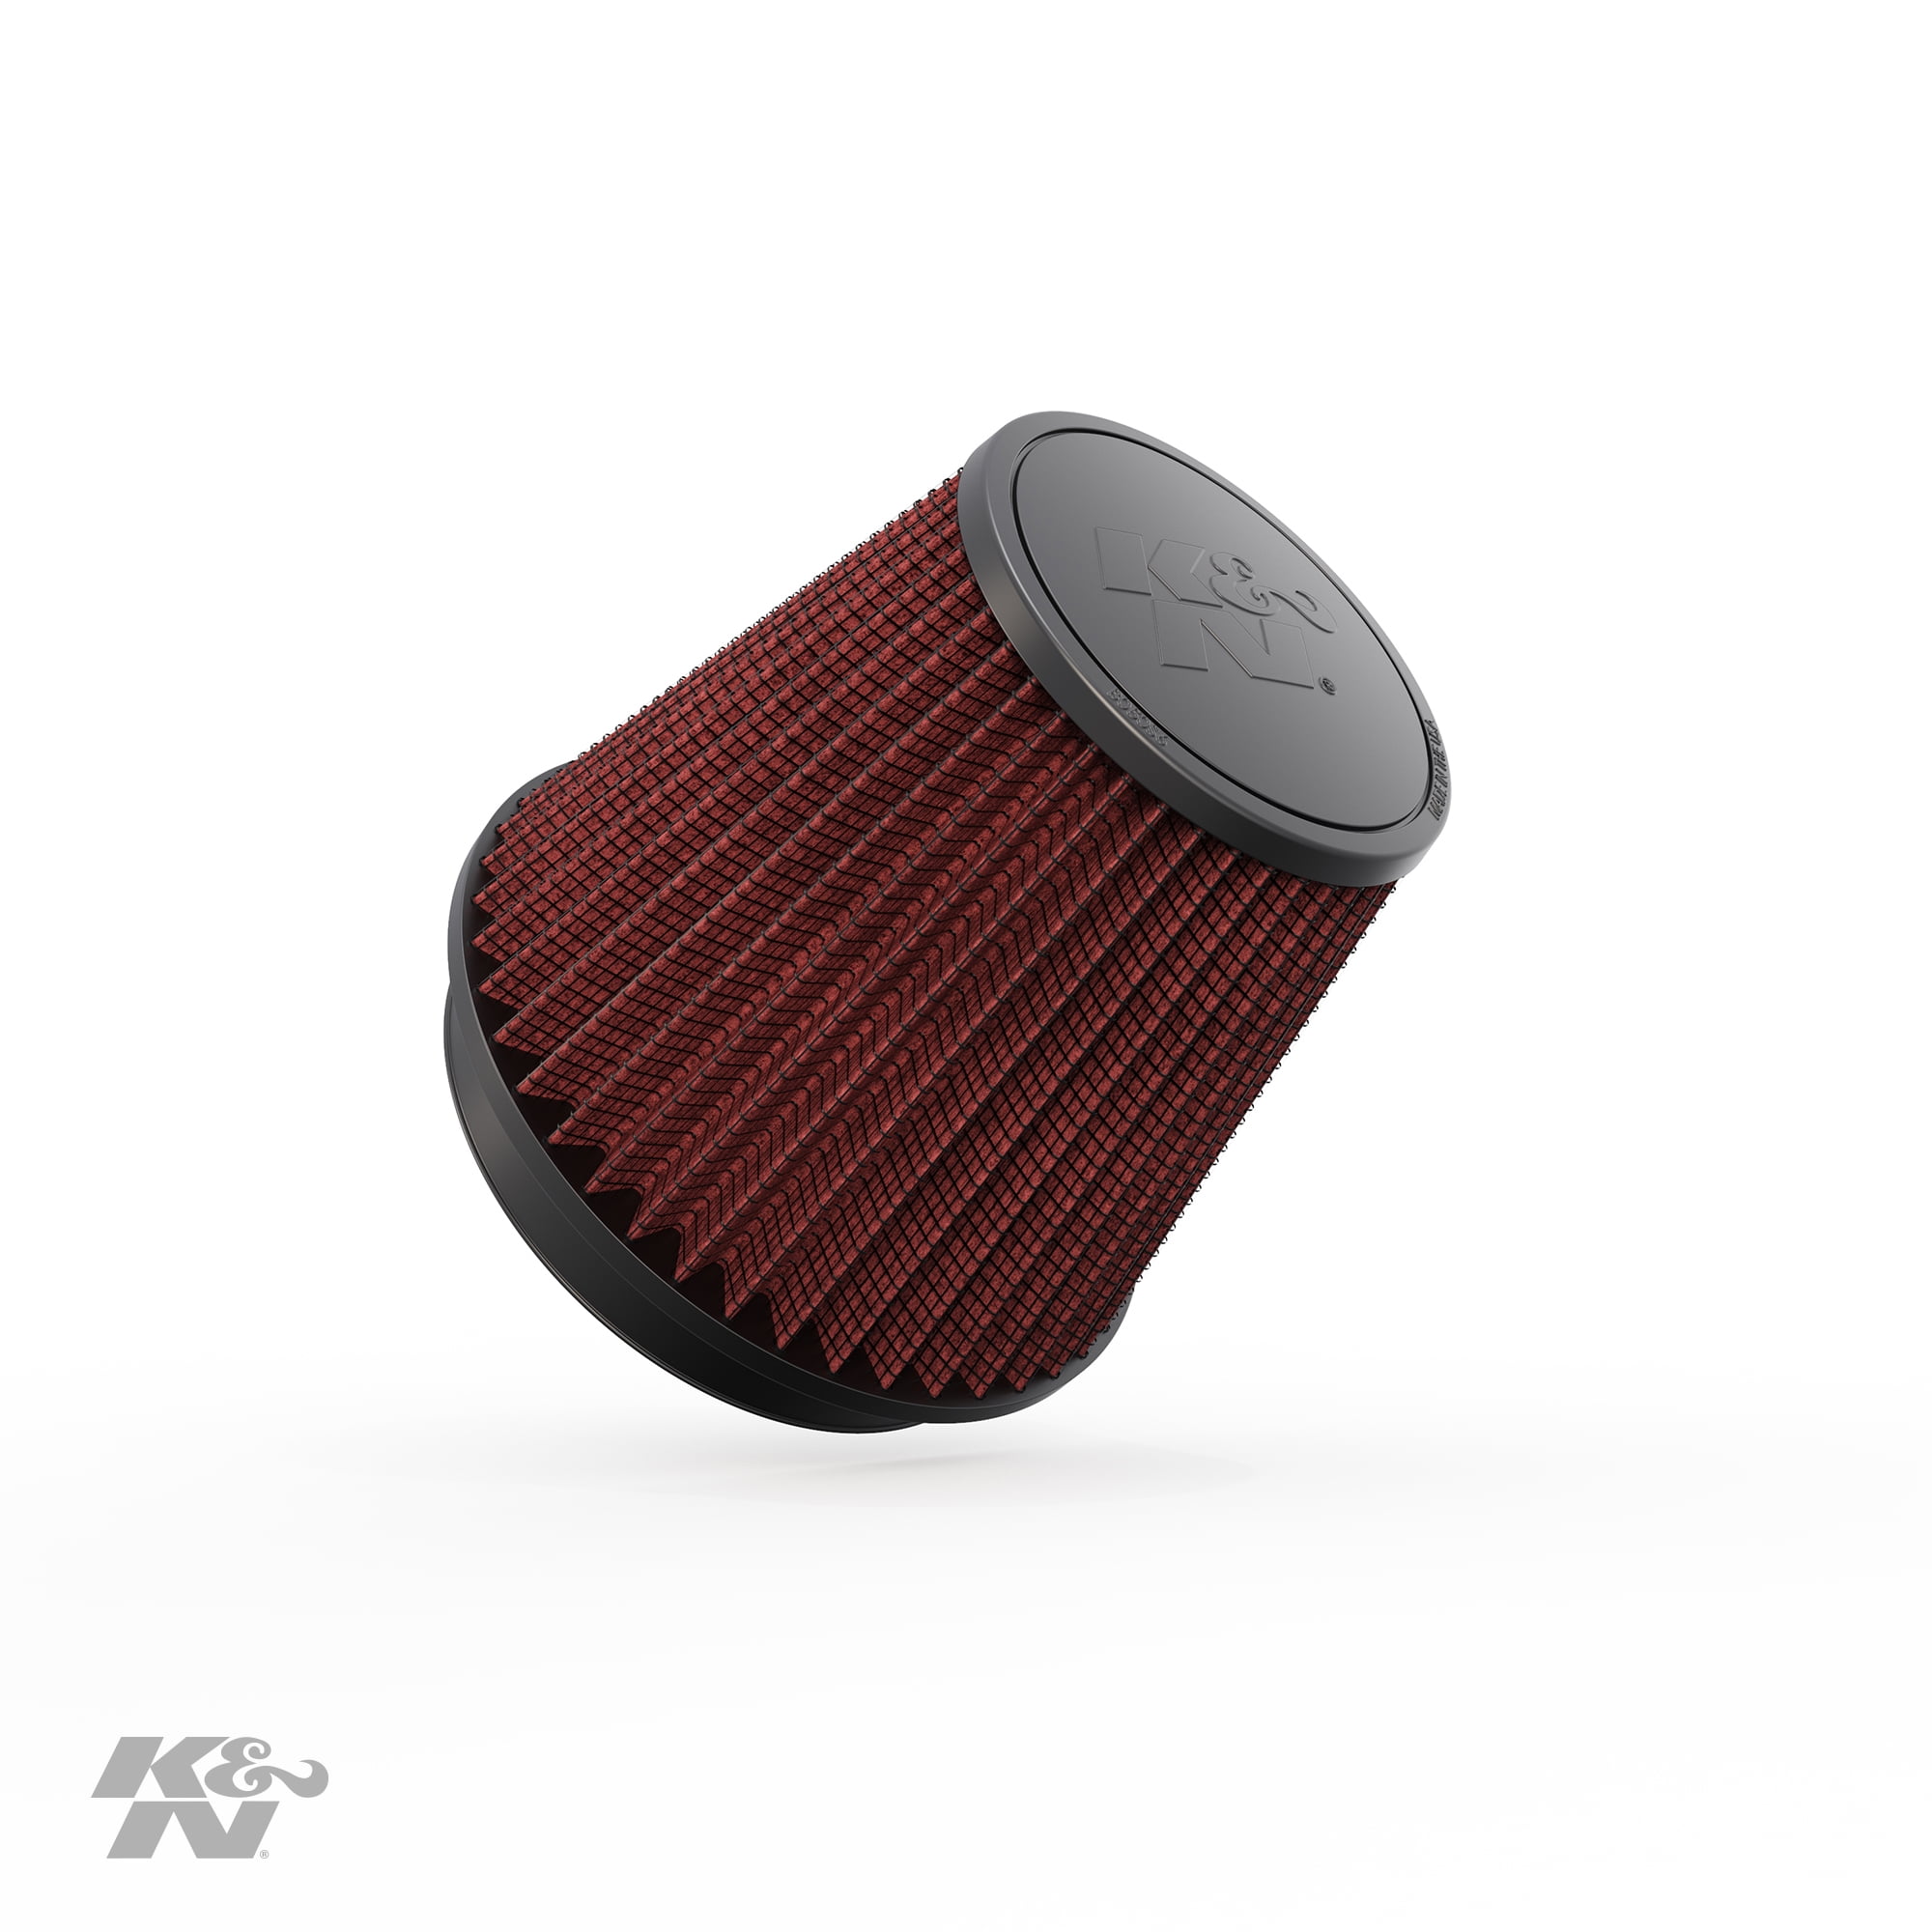 Filter Height: 4 In RU-0500 Premium Replacement Engine Filter: Flange Diameter: 2.0625 In Washable K&N Universal Clamp-On Air Filter: High Performance Shape: Round Flange Length: 0.625 In 